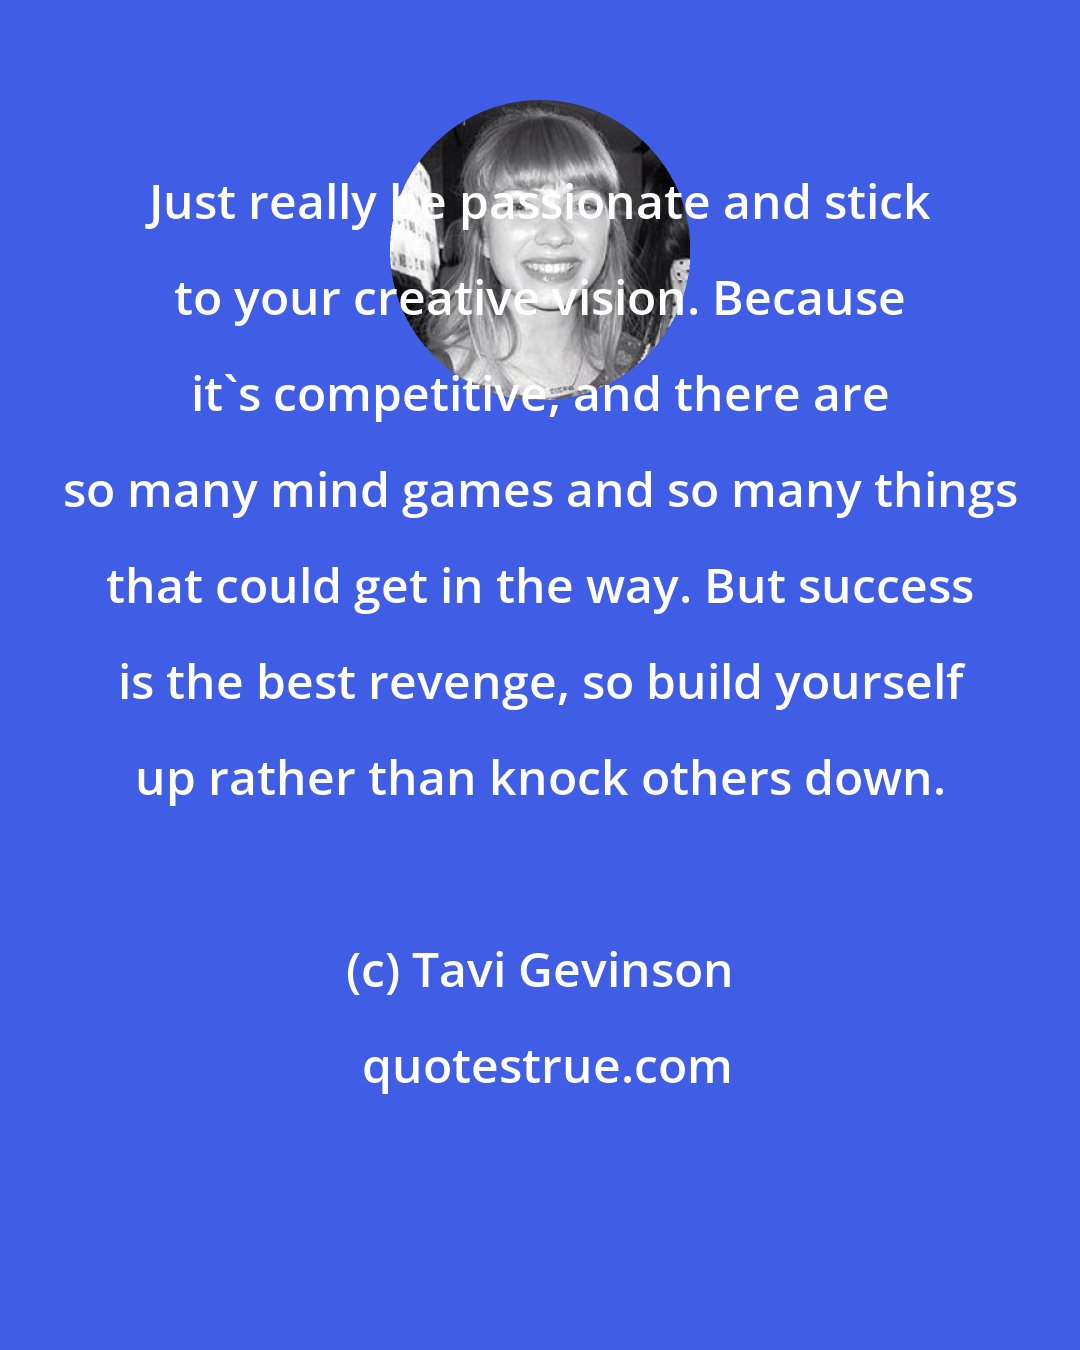 Tavi Gevinson: Just really be passionate and stick to your creative vision. Because it's competitive, and there are so many mind games and so many things that could get in the way. But success is the best revenge, so build yourself up rather than knock others down.